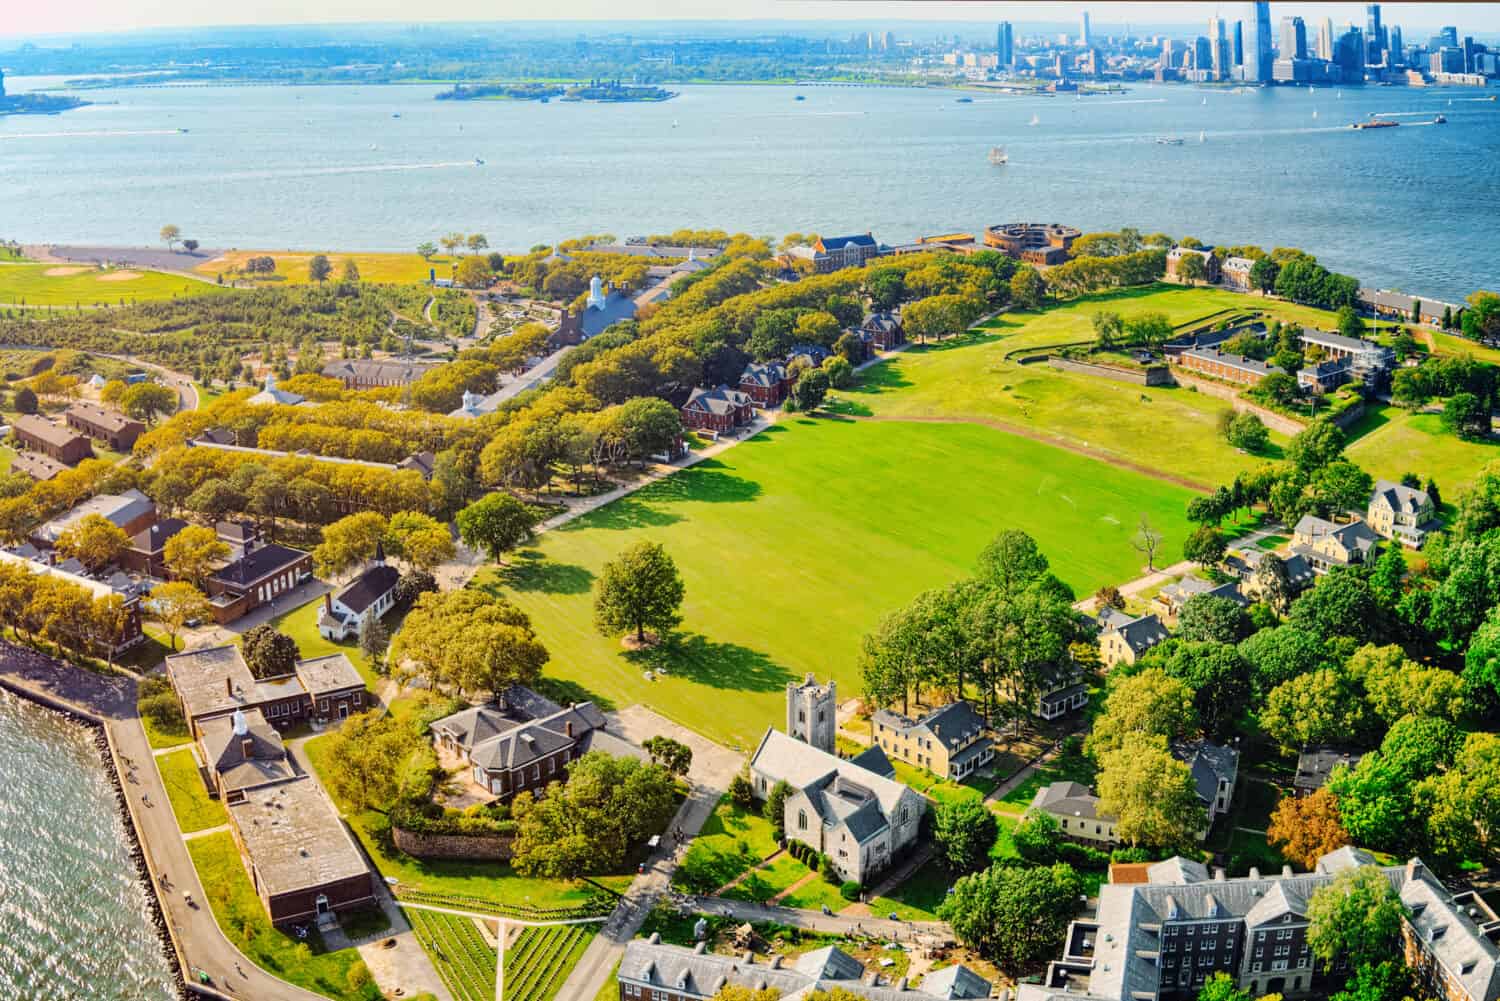 Fly over, view Governors Island National Monument near New York and Manhattan from a bird's eye view.